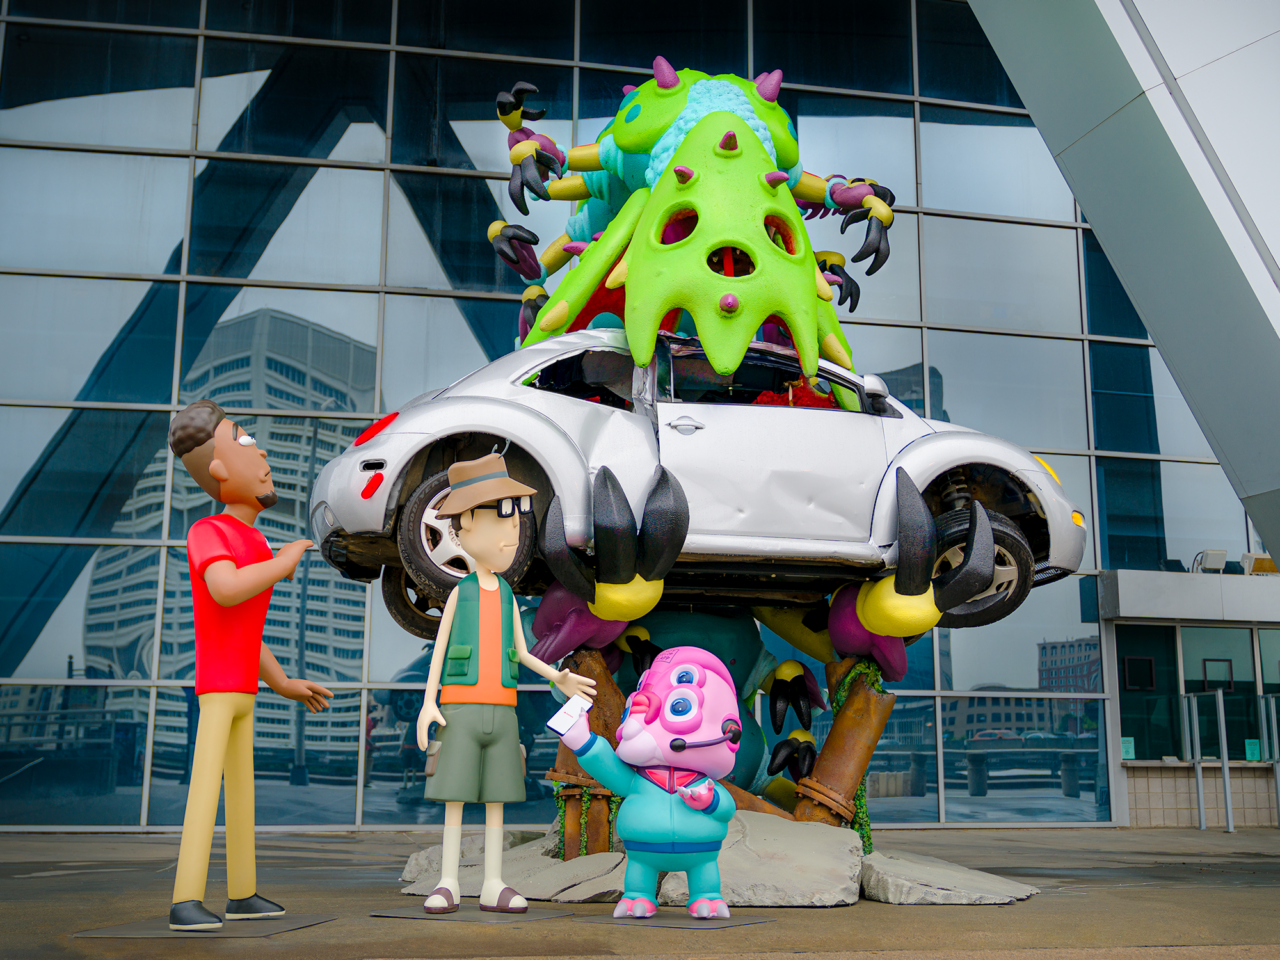 A sculpture of Rick and Morty characters Glootie and Gene alongside Jake from State Farm at the State Farm Arena in Atlanta, GA. The scene is part of the ongoing #WORMAGEDDON fan experience leading to the global release of Adult Swim’s Rick and Morty season six starting September 4, 2022. (Courtesy Adult Swim)